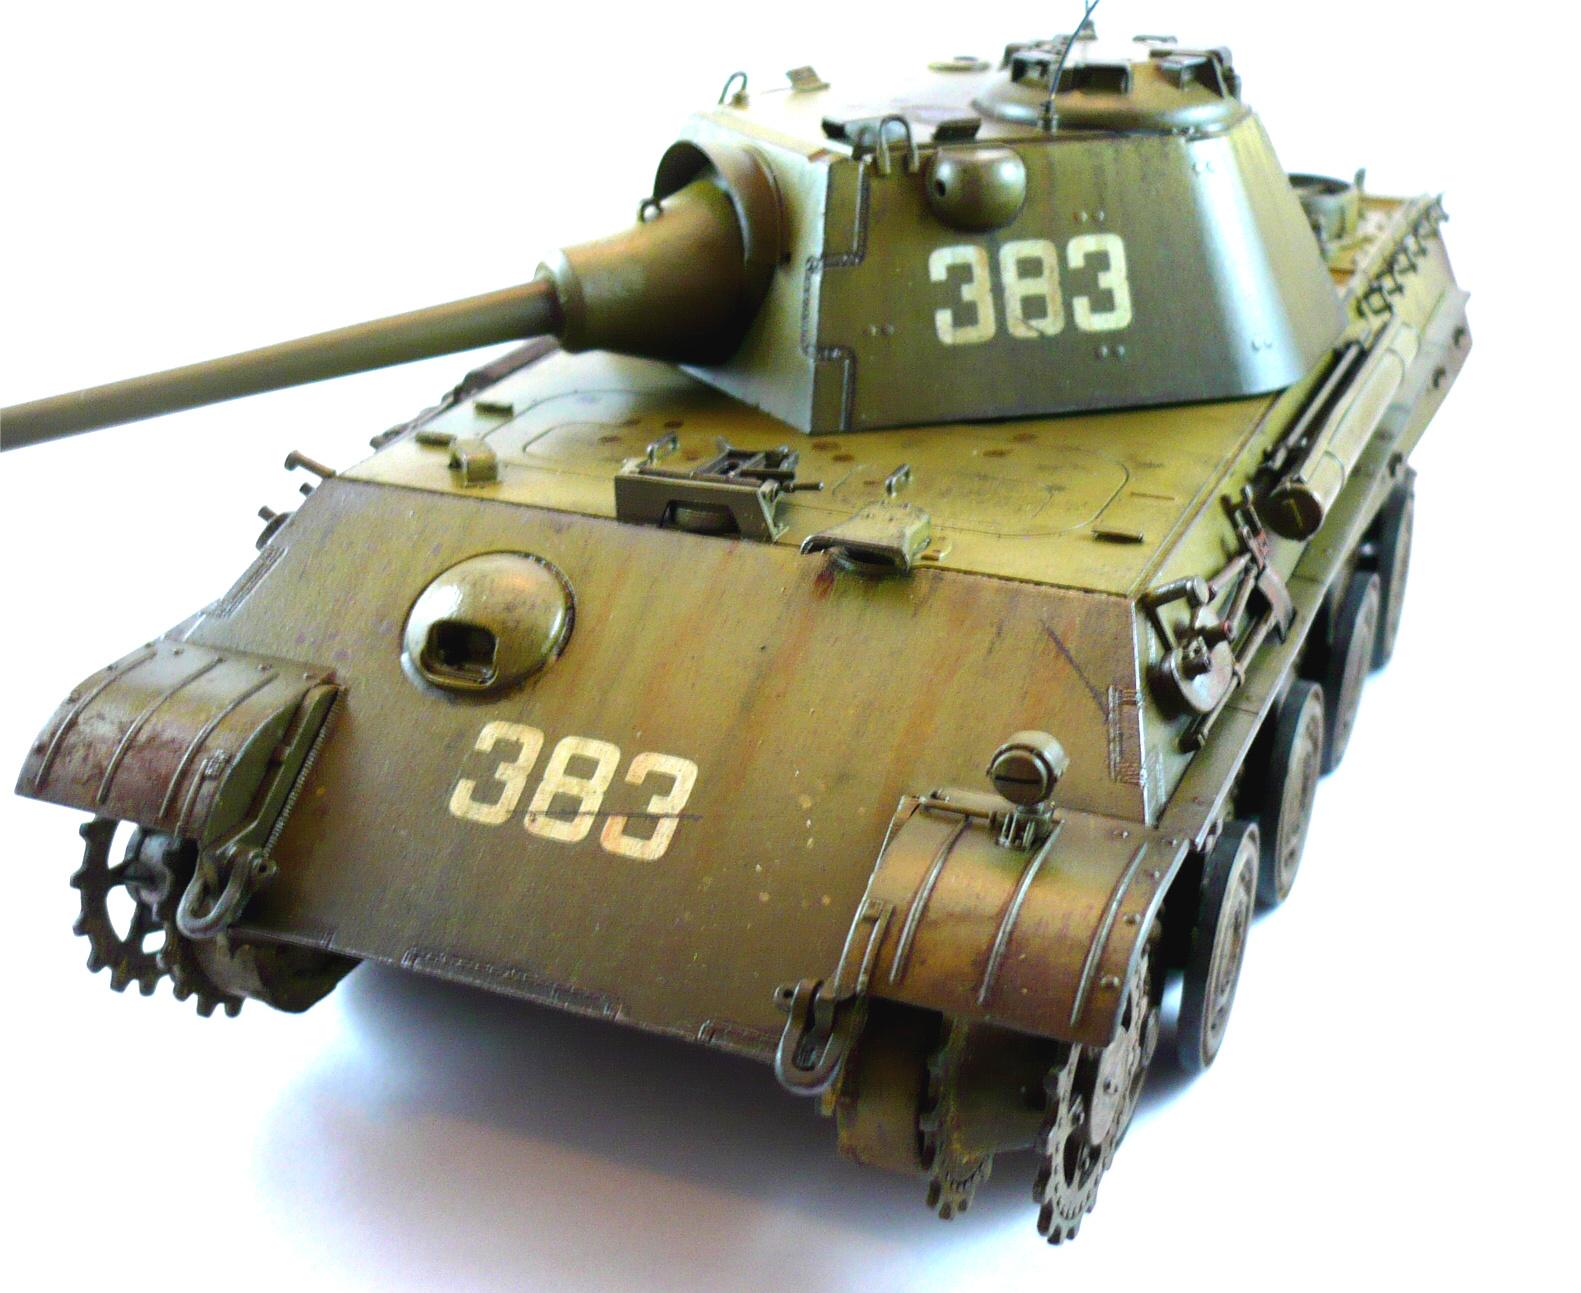 1/35 Scale, Flames Of War, Military Modeling, Military Modelling, Panther, Panther F, Tiger, World War 2